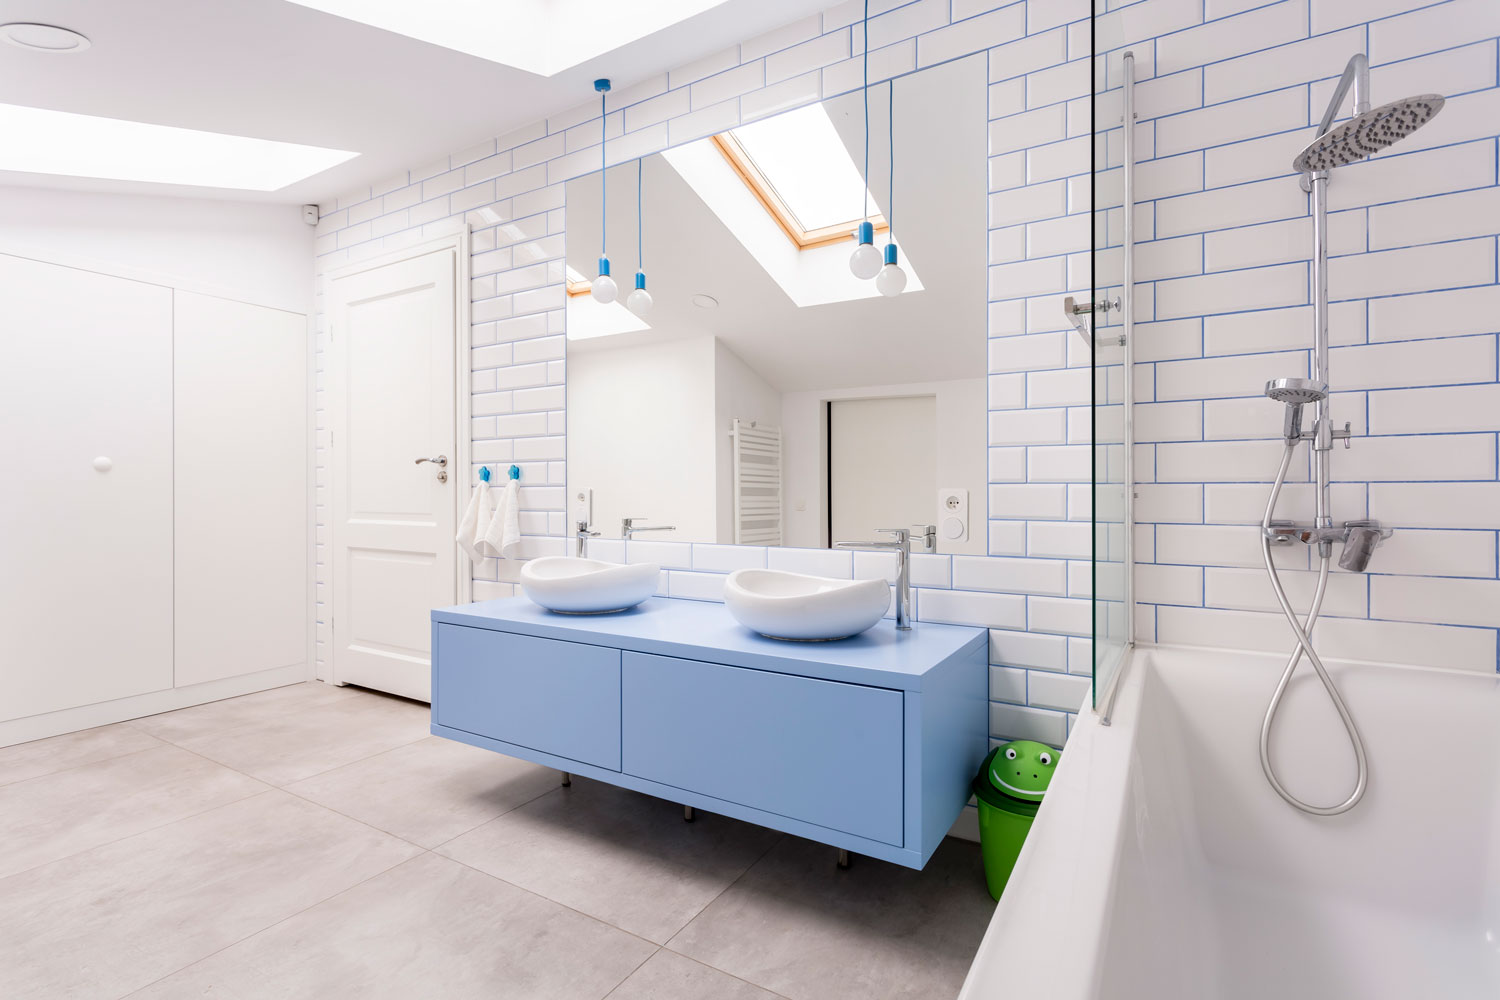 Huge and spacious bright blue and white themed bathroom with a skylight window